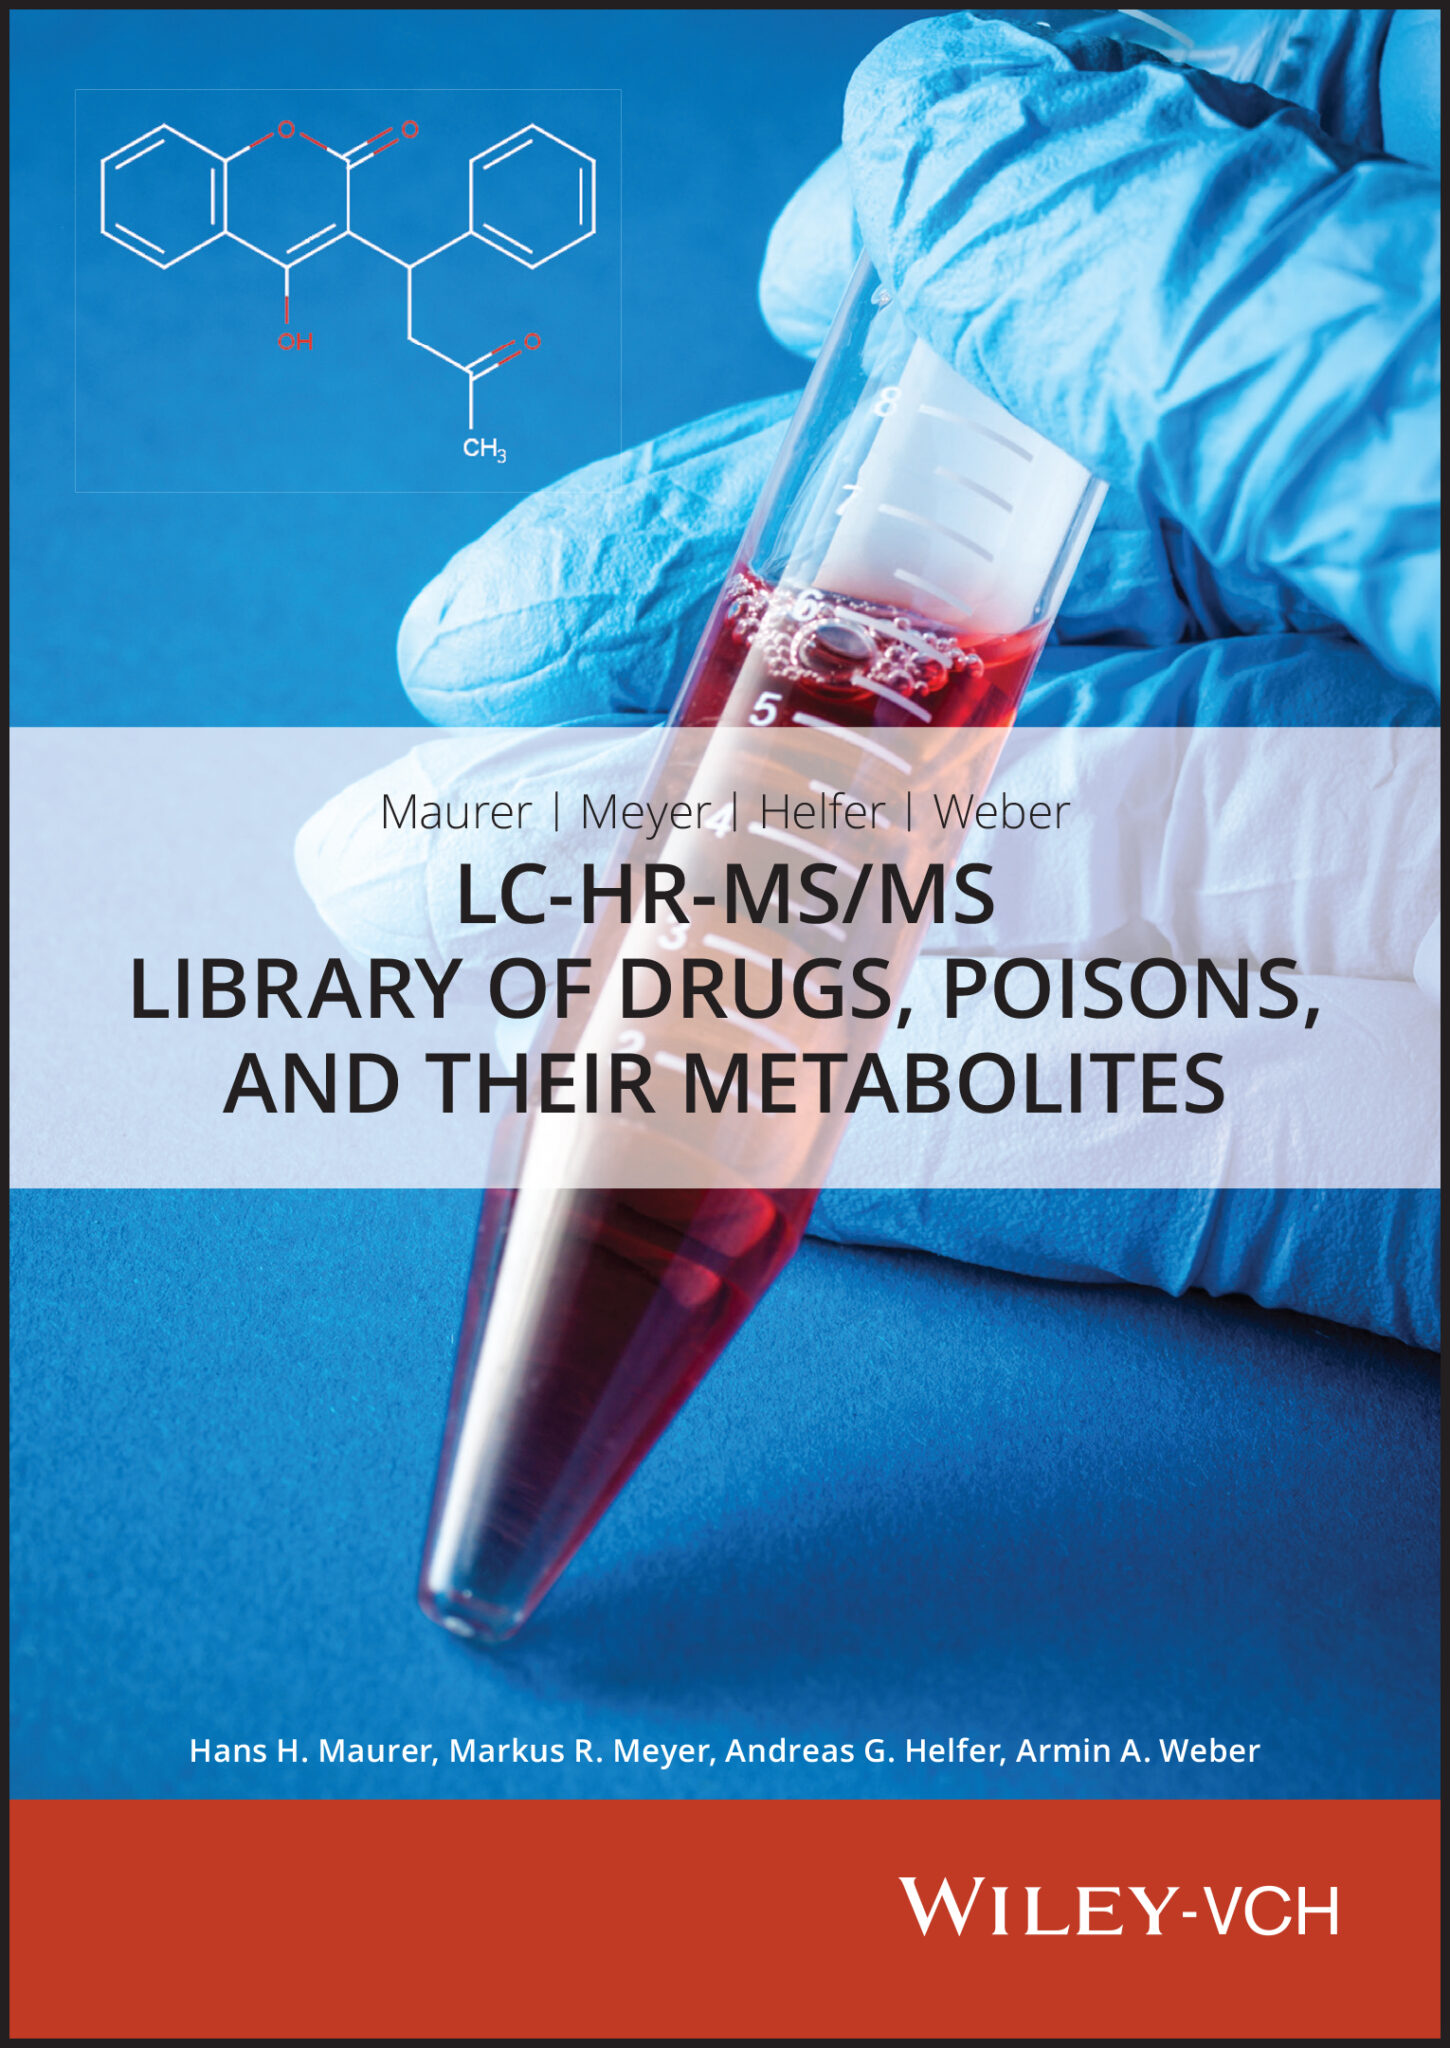 Wiley LC-HR-MS/MS Library of Drugs, Poisons and Their Metabolites